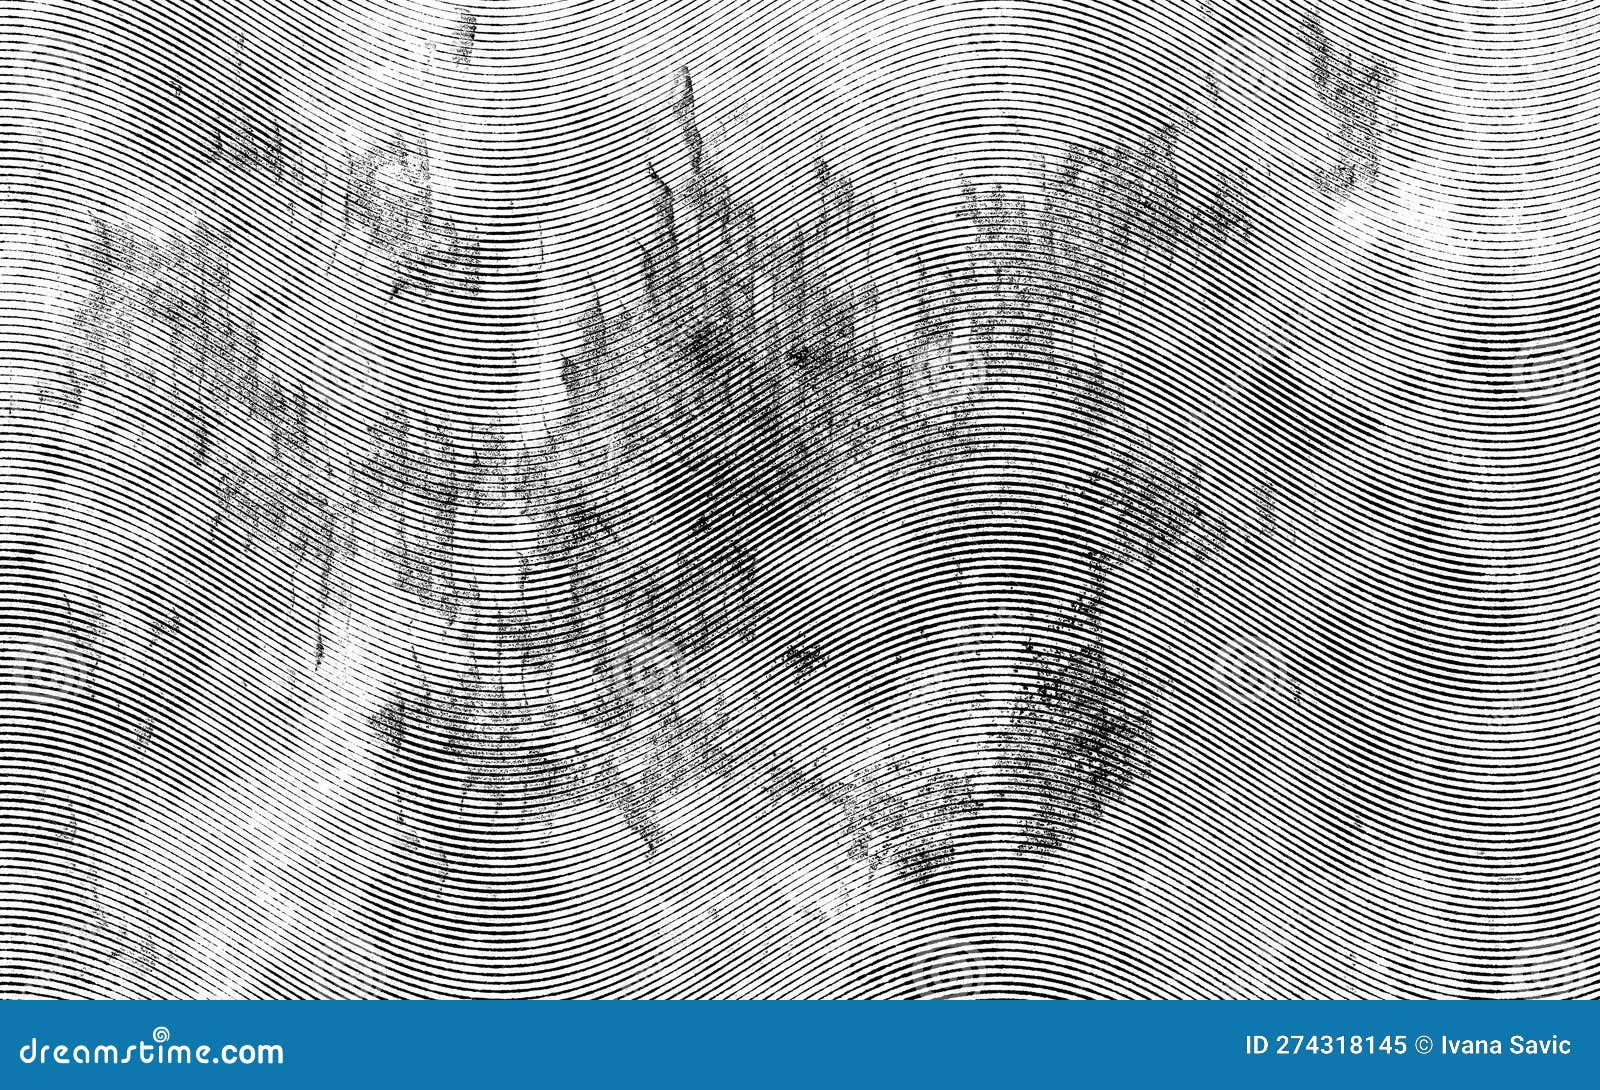 29+ Thousand Circle Swoosh Vector Royalty-Free Images, Stock Photos &  Pictures